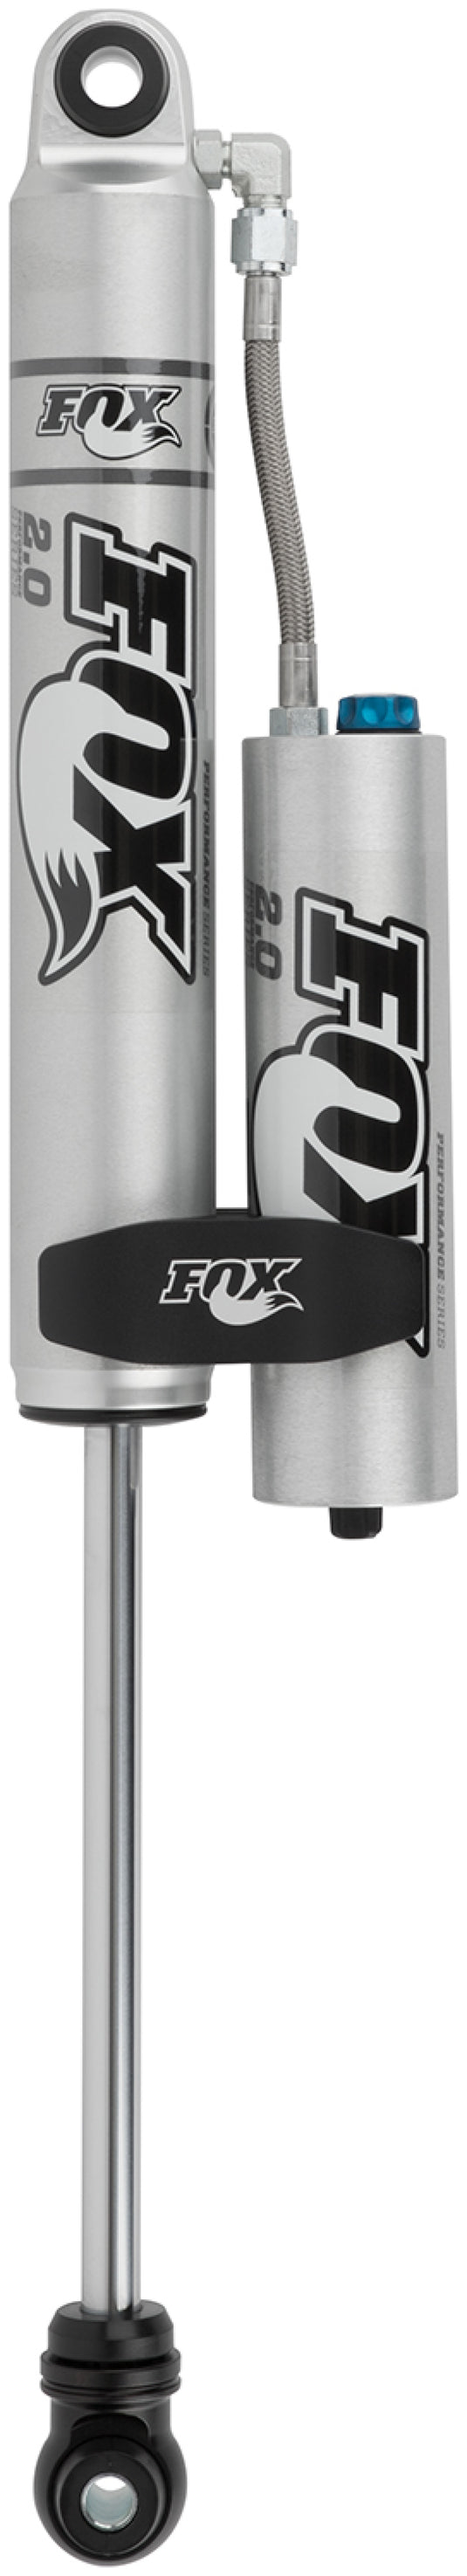 Fox | 1999-2019 GM 2500 / 3500 HD 2.0 Factory Series Smooth Body Reservoir Rear Shock With Adjuster | 4-6 Inch Lift